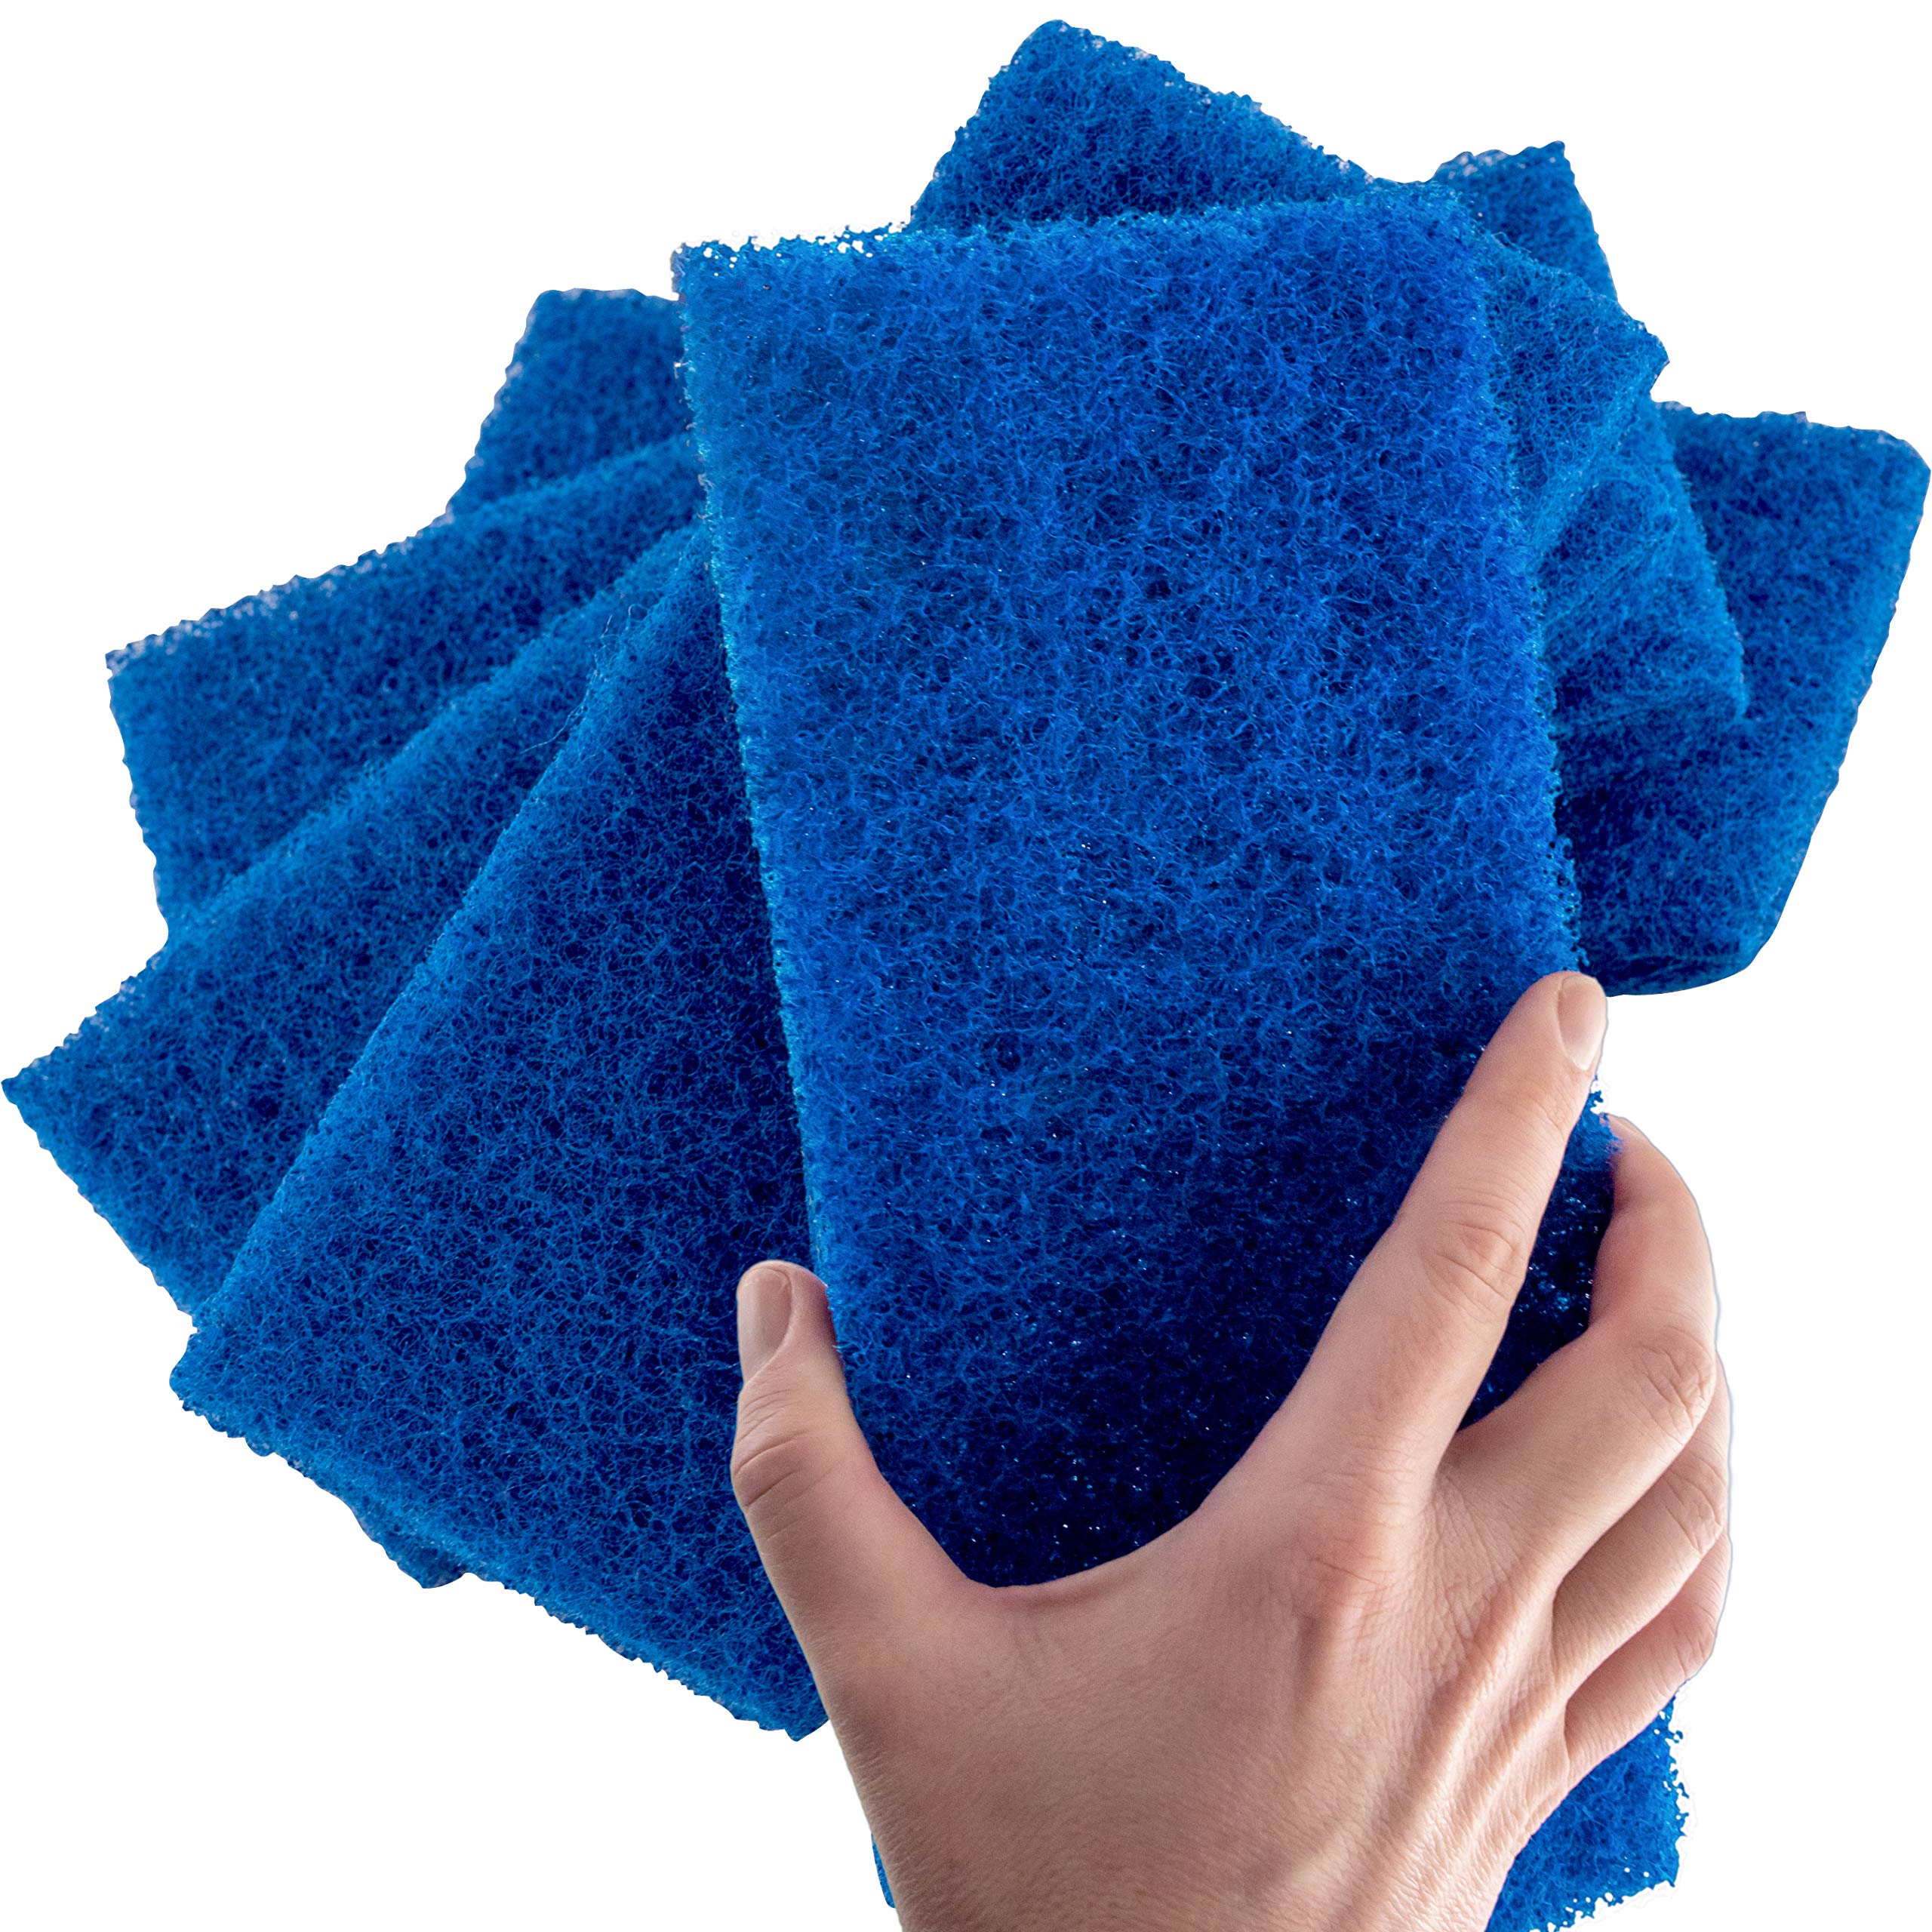 Medium Duty XL Blue Scouring Pad 5 Pack. 10 x 4.5in Large Multipurpose  Nylon Scrubbing Sponges. Clean Kitchens, Bathrooms, Counters and Floors to  Erase Grime and Make Surfaces Sparkle